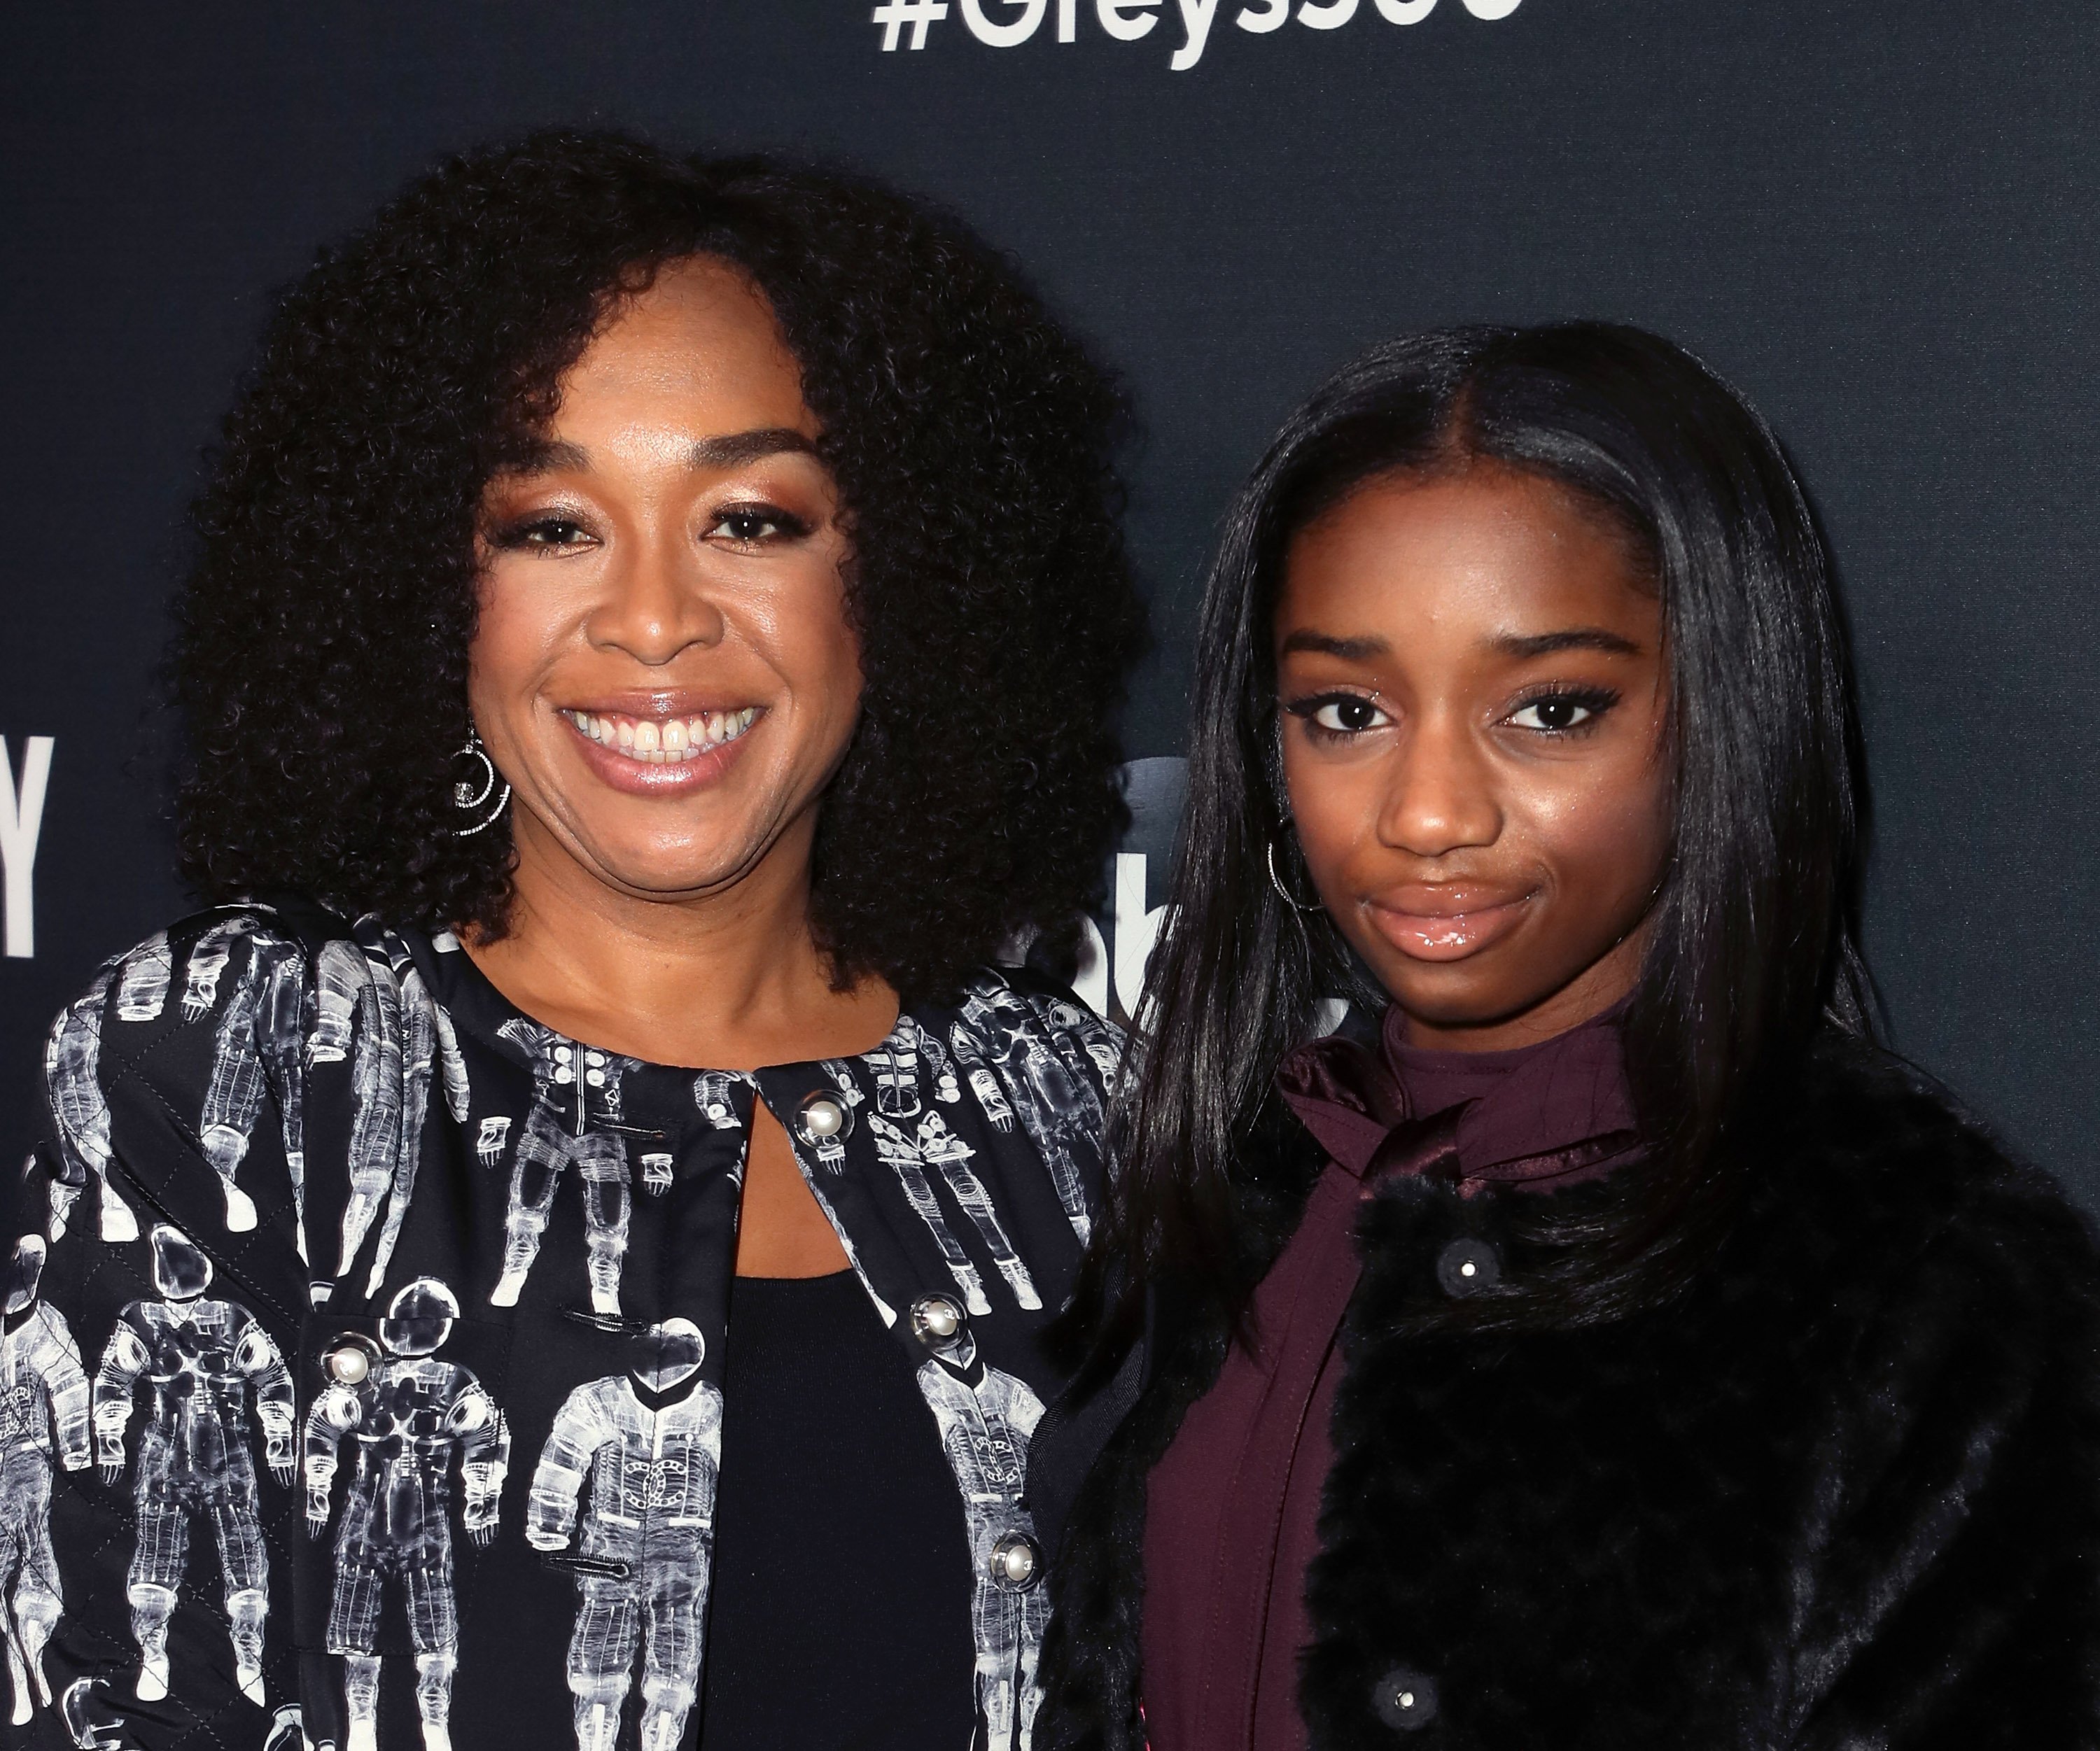 Shonda Rhimes and daughter Harper Rhimes at the 300th episode celebration for "Grey's Anatomy" in 2017 in Los Angeles. | Source: Getty Images